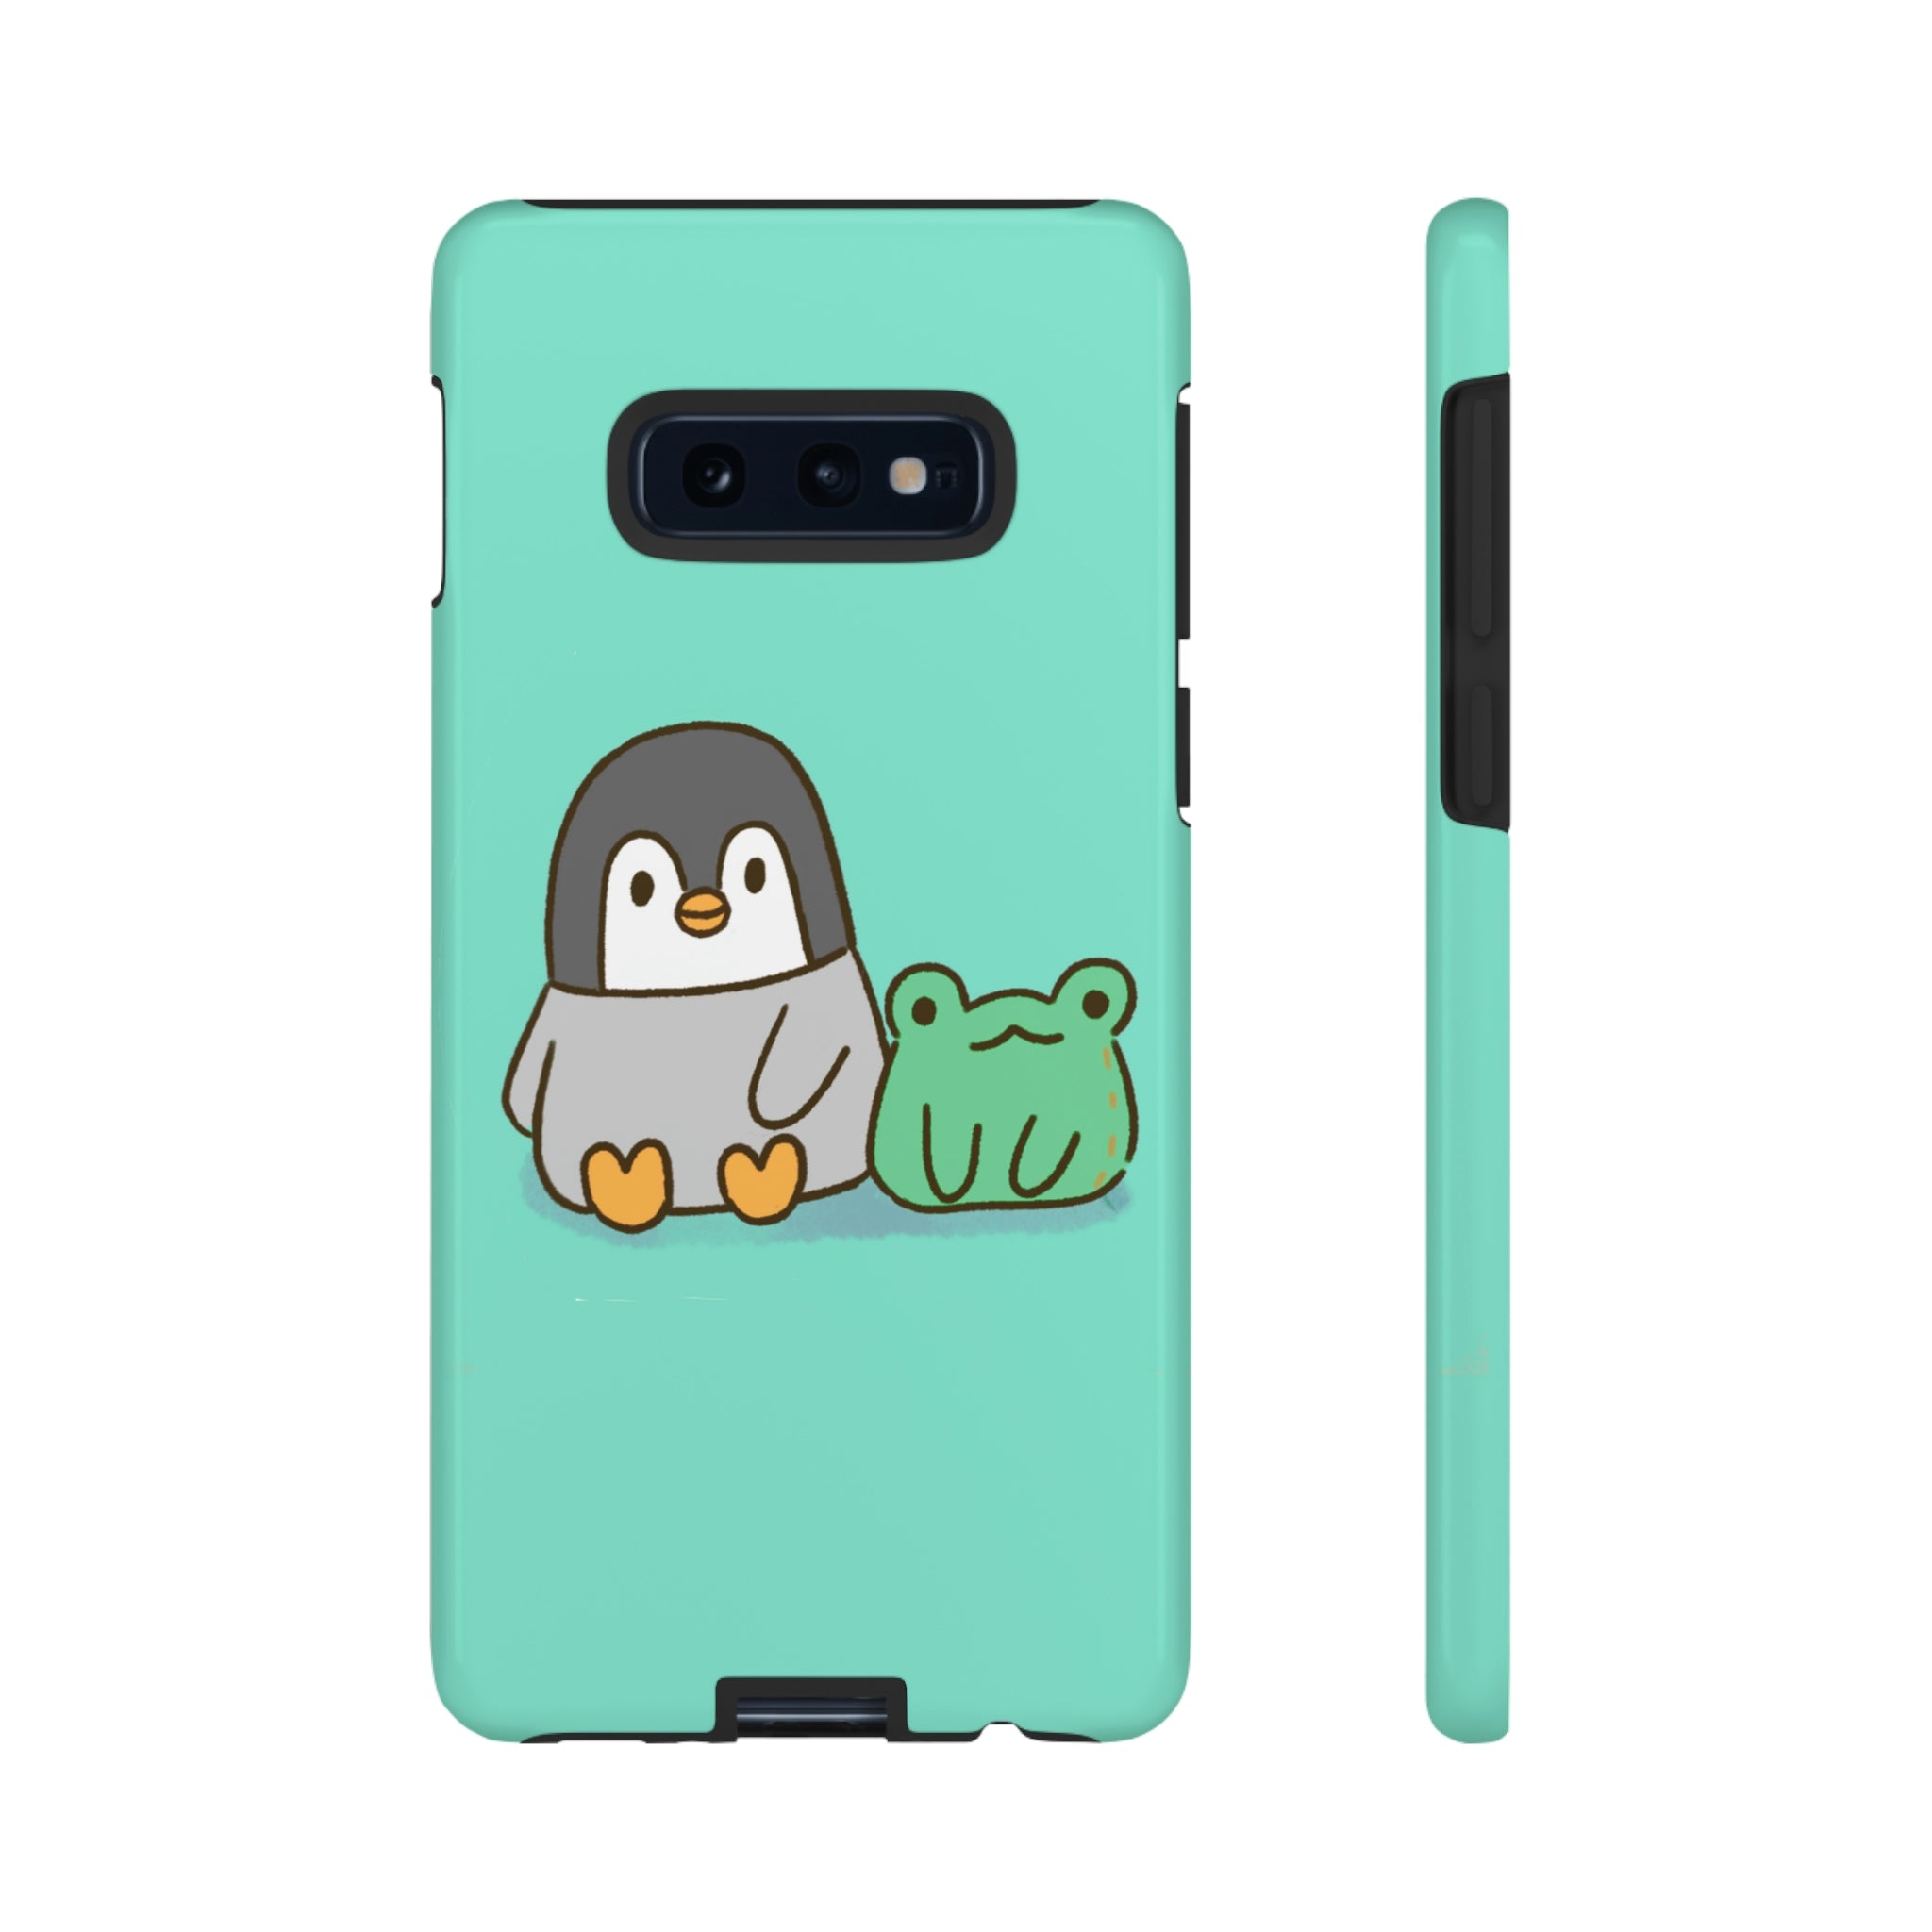 Me and my Frog Samsung/Google Phone Case